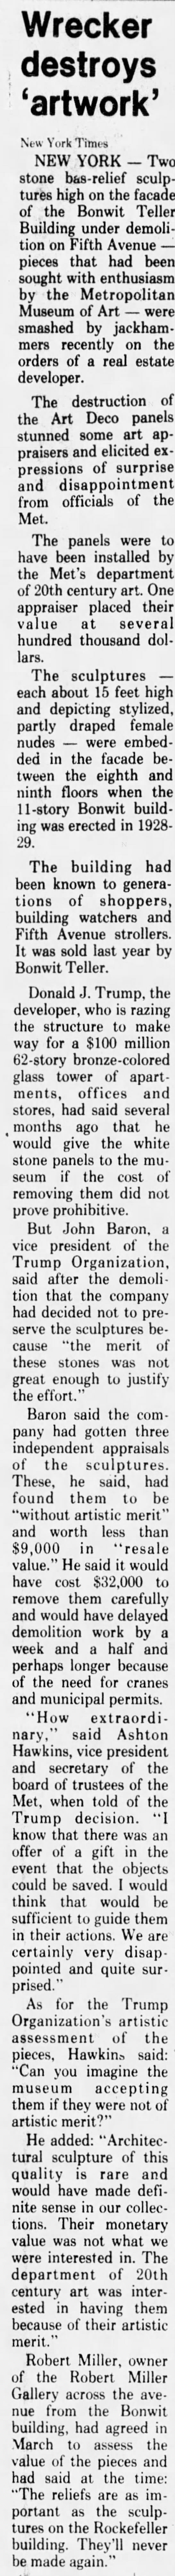 John Baron (or sometimes barron) is a fake name that Trump admitted to using. - 